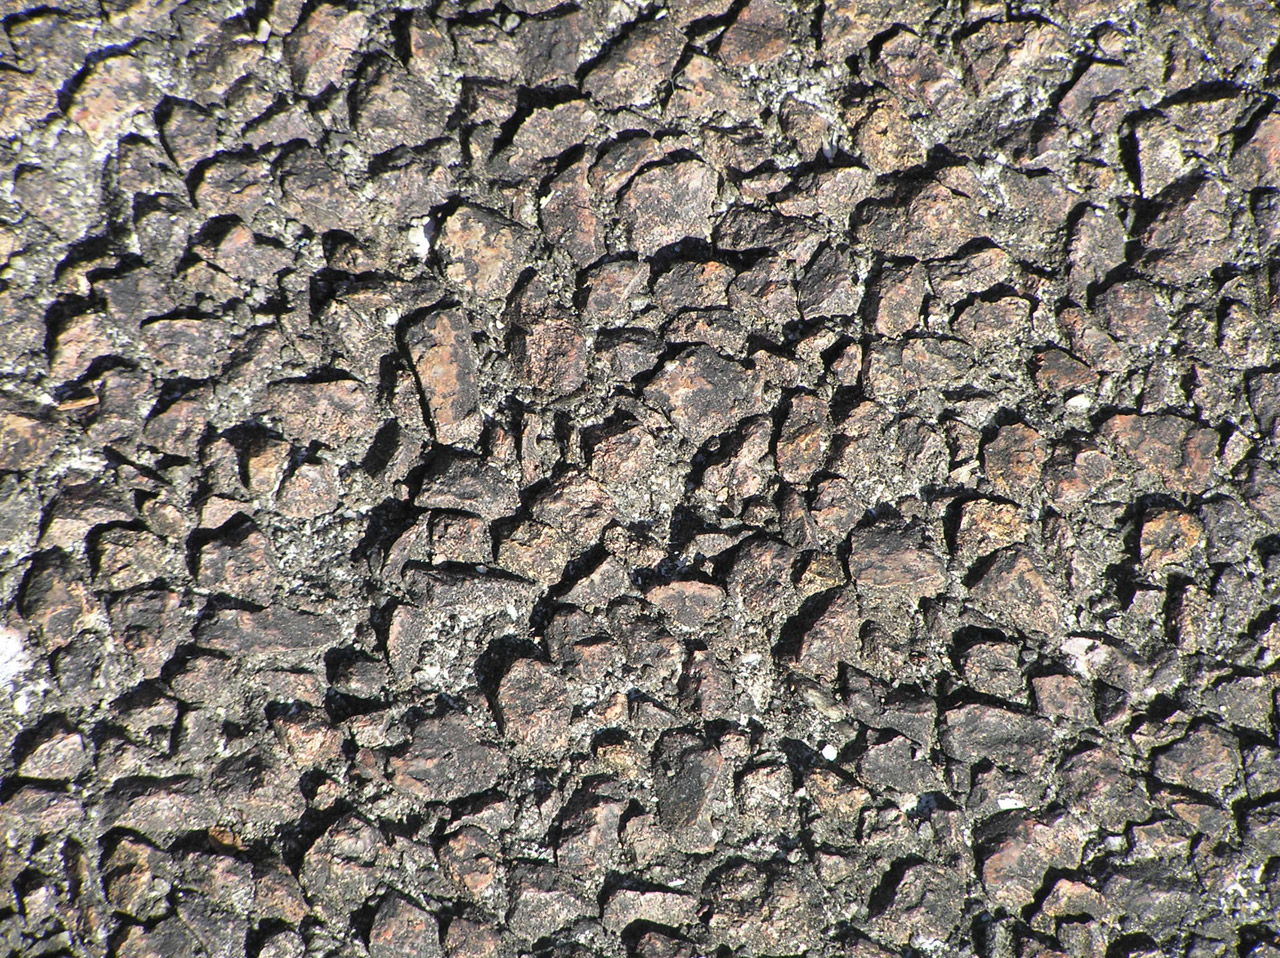 Rocky texture of a pathway